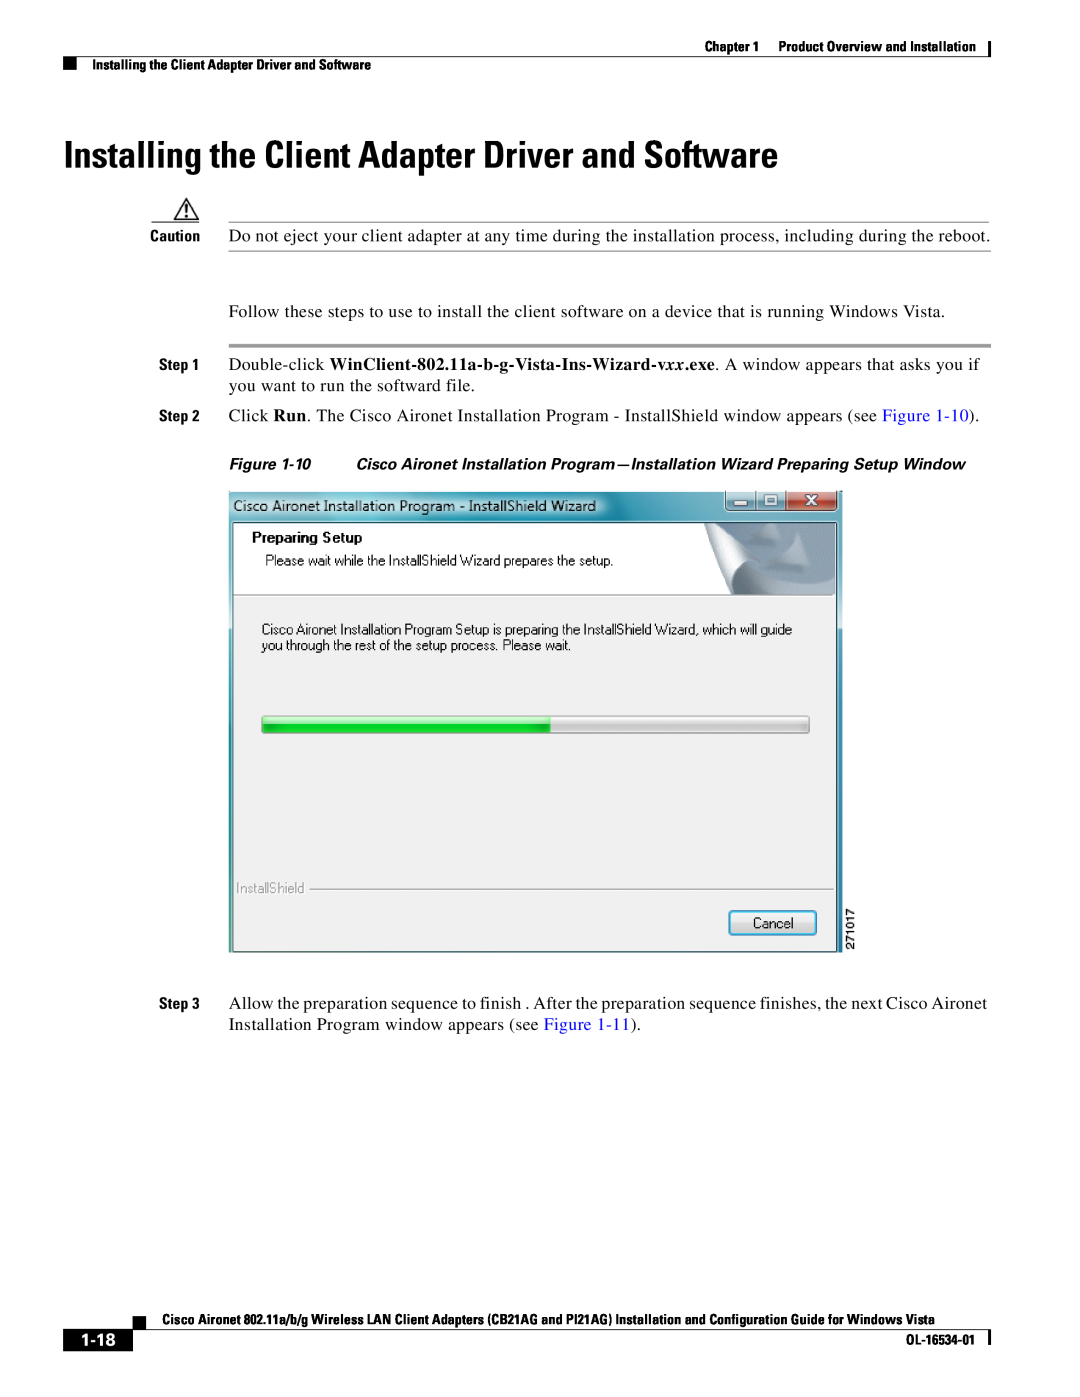 Cisco Systems PI21AG, CB21AG manual Installing the Client Adapter Driver and Software, 1-18 